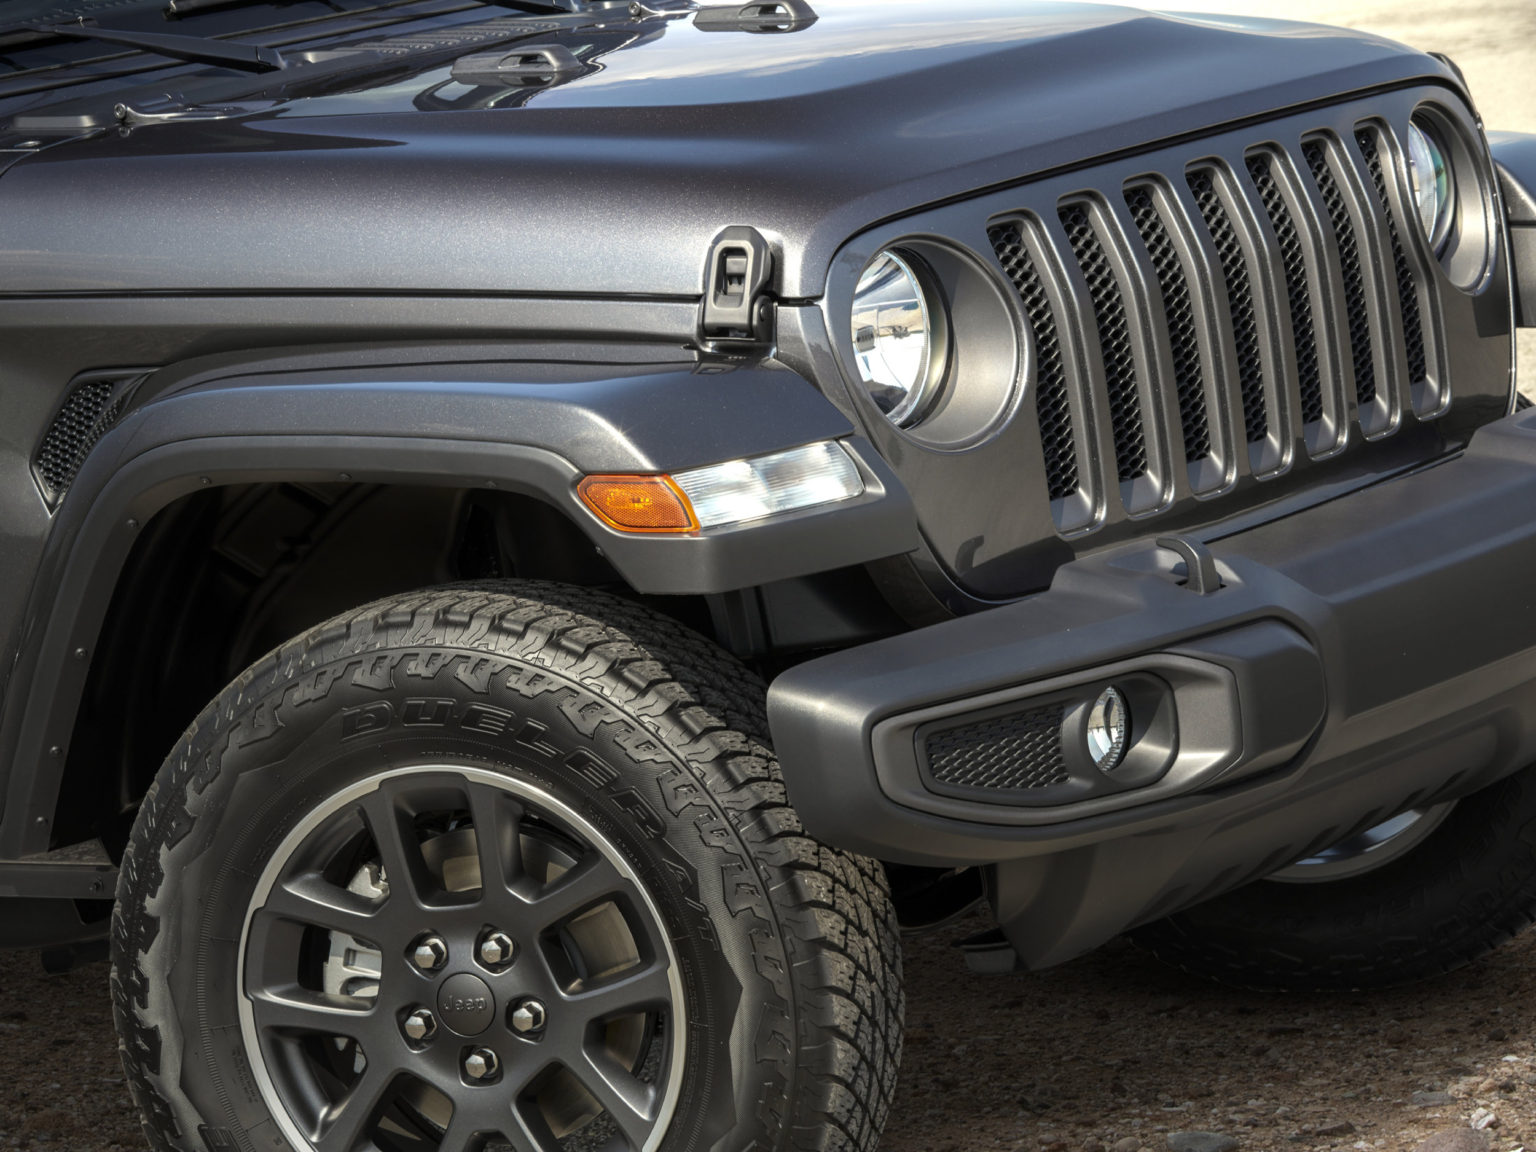 Jeep has debuted a lineup of models that celebrate the company's 80th anniversary.